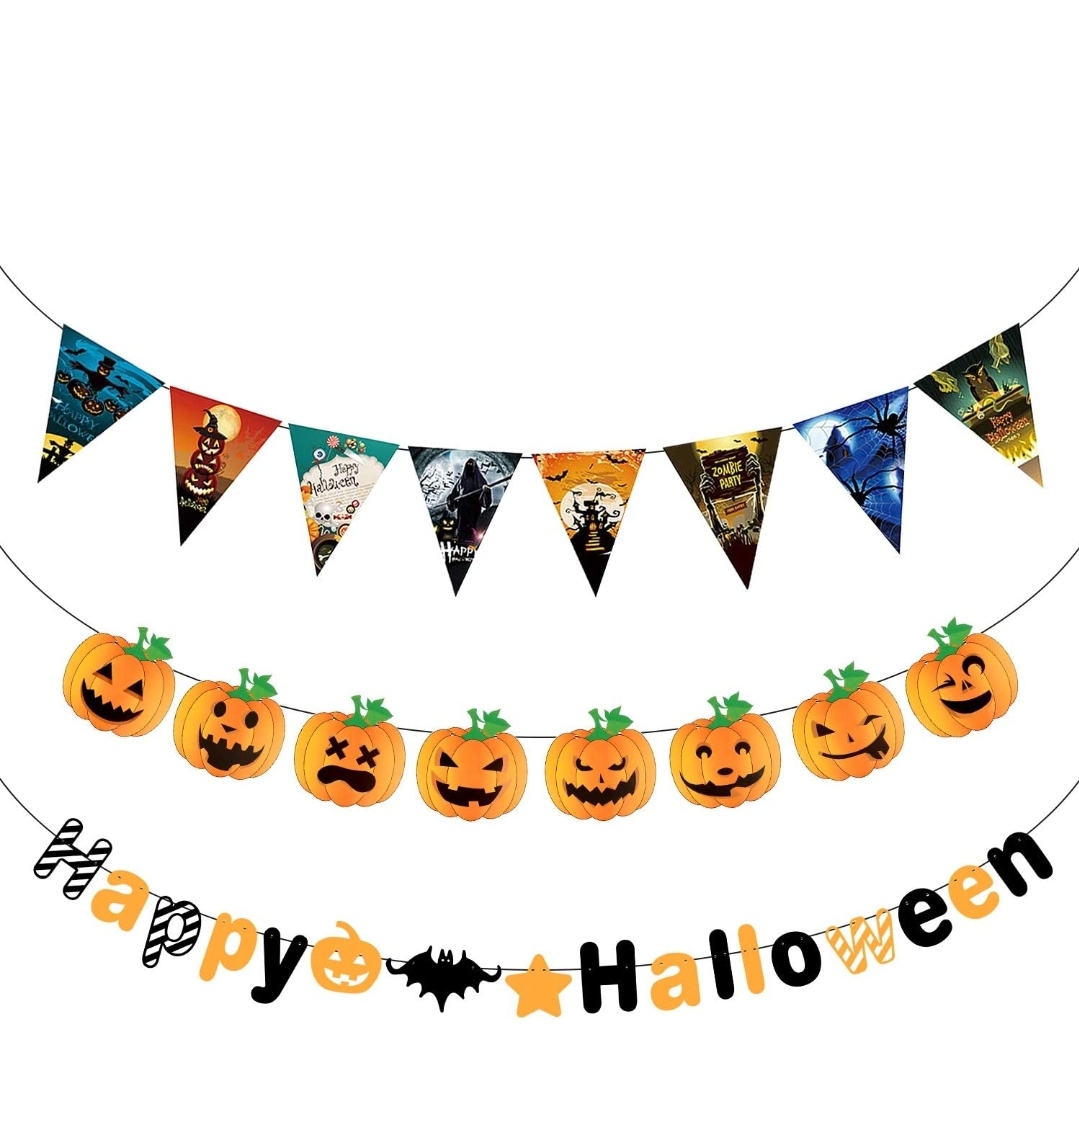 5 Child Friendly Halloween Party Banner Decorations by HIDARLING